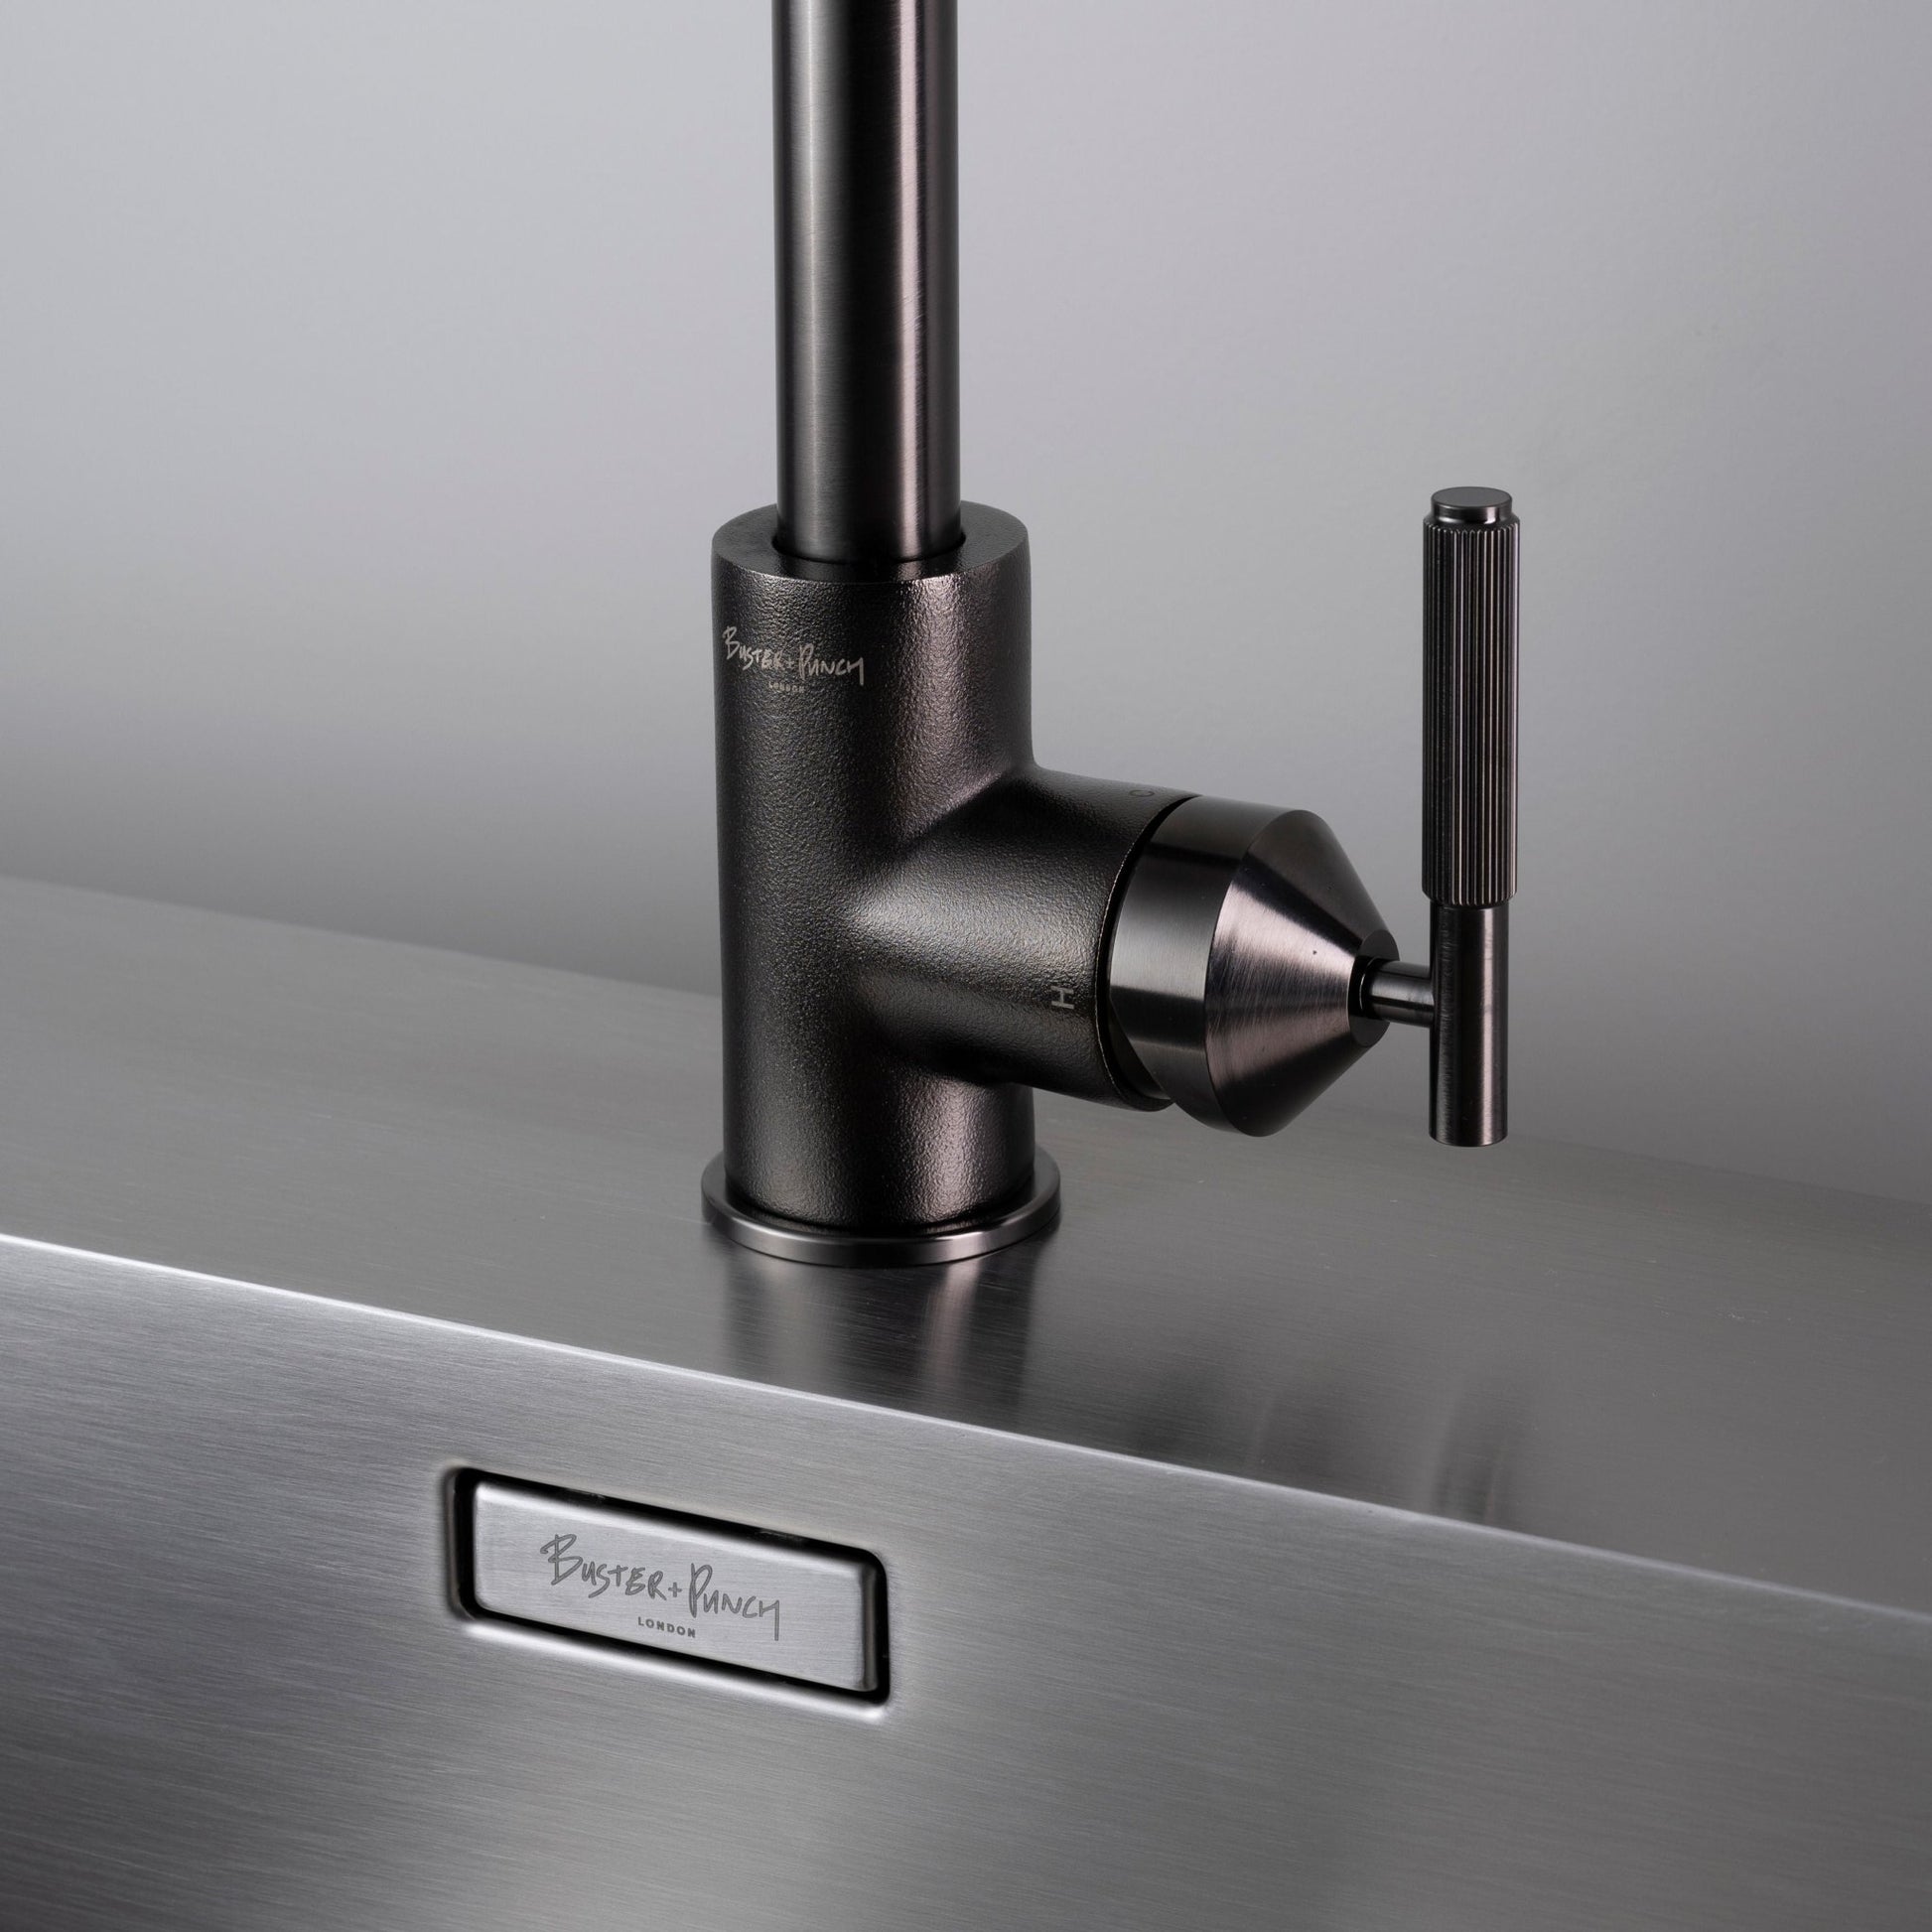 Luxury Buster and Punch Pull Out Kitchen Faucet GUN METAL - |VESIMI Design| Luxury and Rustic bathrooms online